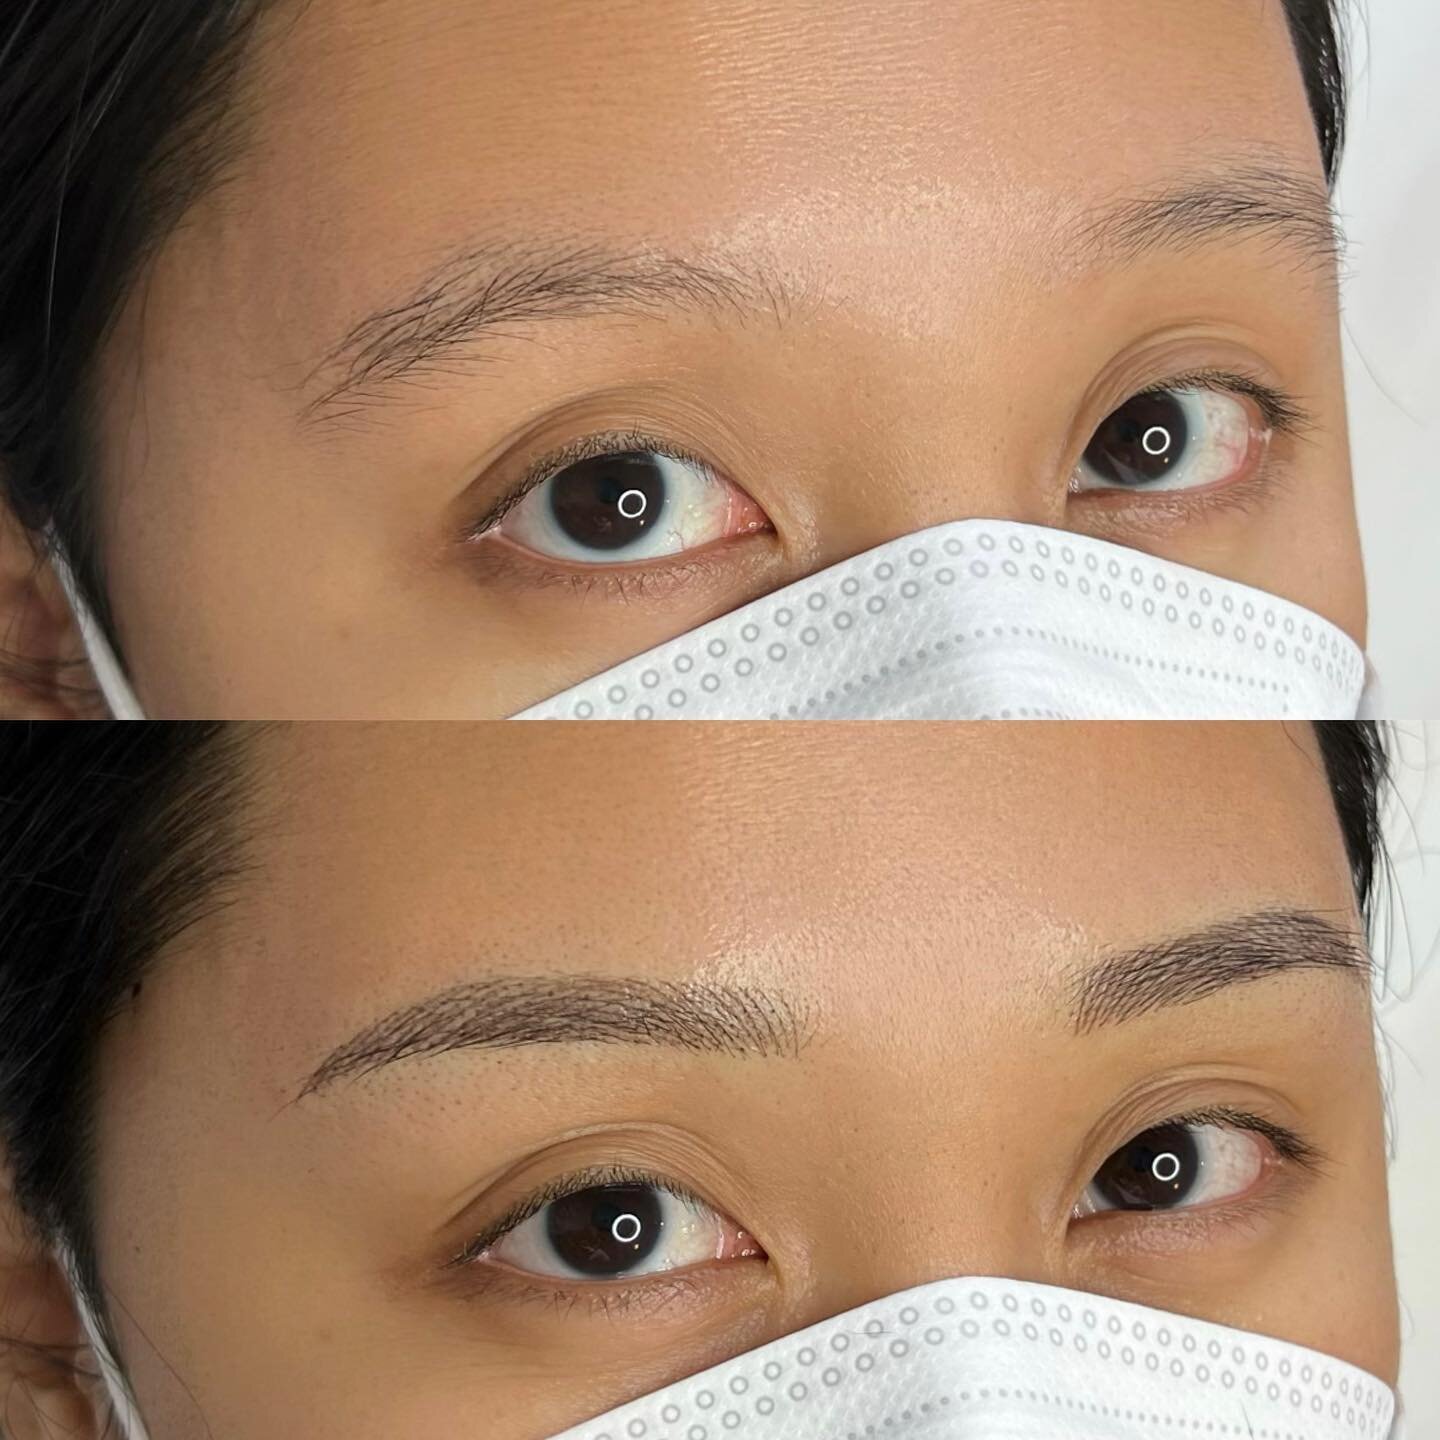 Love this transformation! The thinnest &amp; softest nano strokes #nanofeatherbrows 
&mdash;
Skin type: Combination
Technique: Nano Feather Brows
Pain level: None
Appointment time: 2 hours
Sessions: 2 required
Healing time: 7-10 days (no scabbing)
La